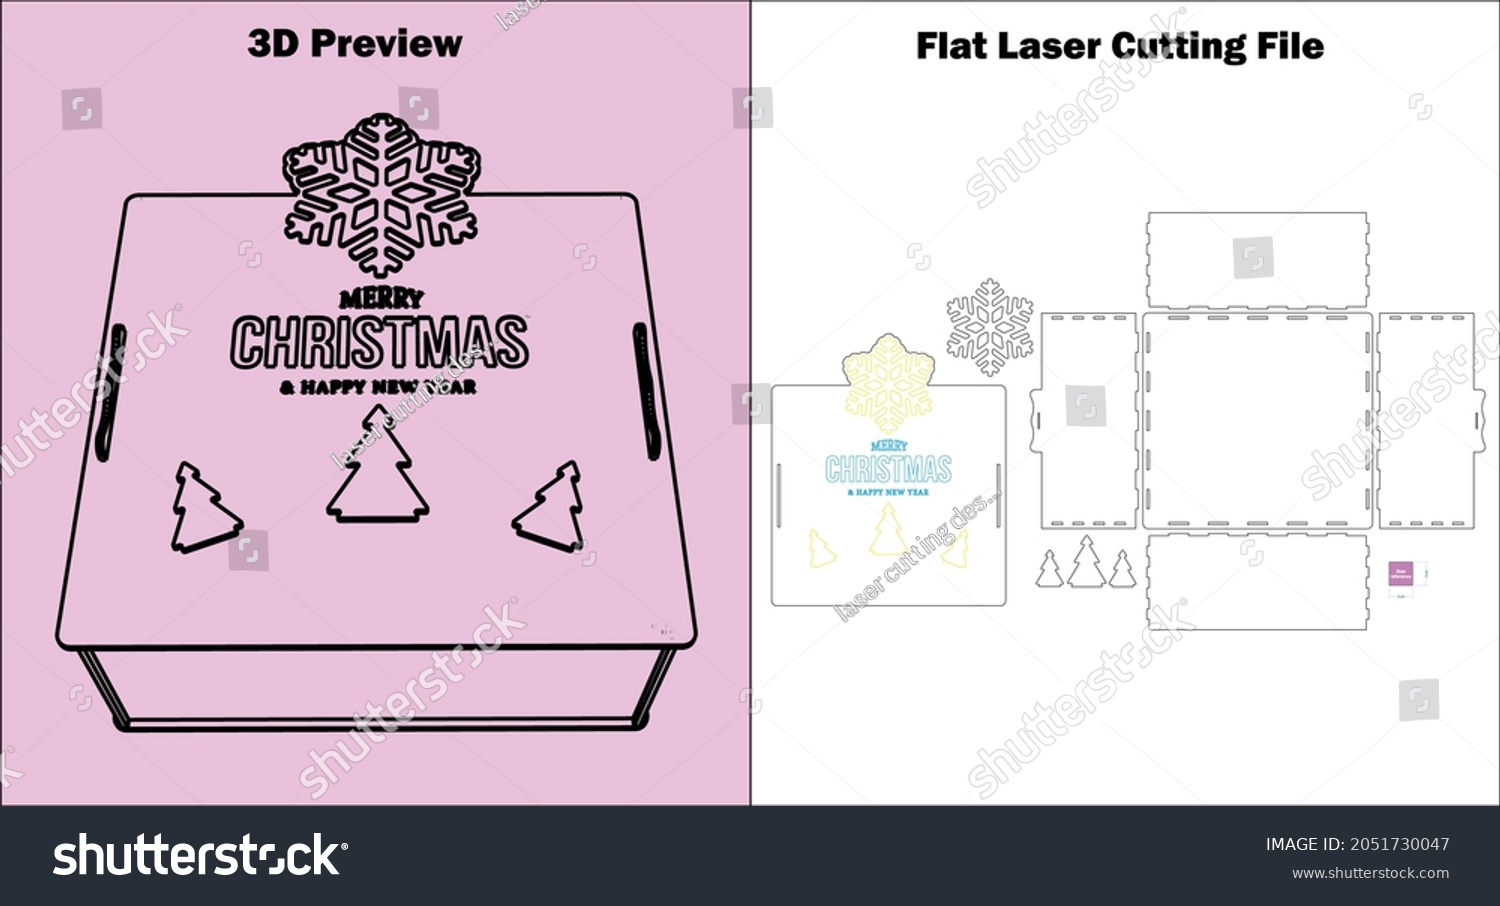 SVG of Gift Box
Gift boxes have the potential to make gift-giving magical. This model is a Christmas Gift Box that can be used as a flower box.
available for all 3mm material thicknesses svg